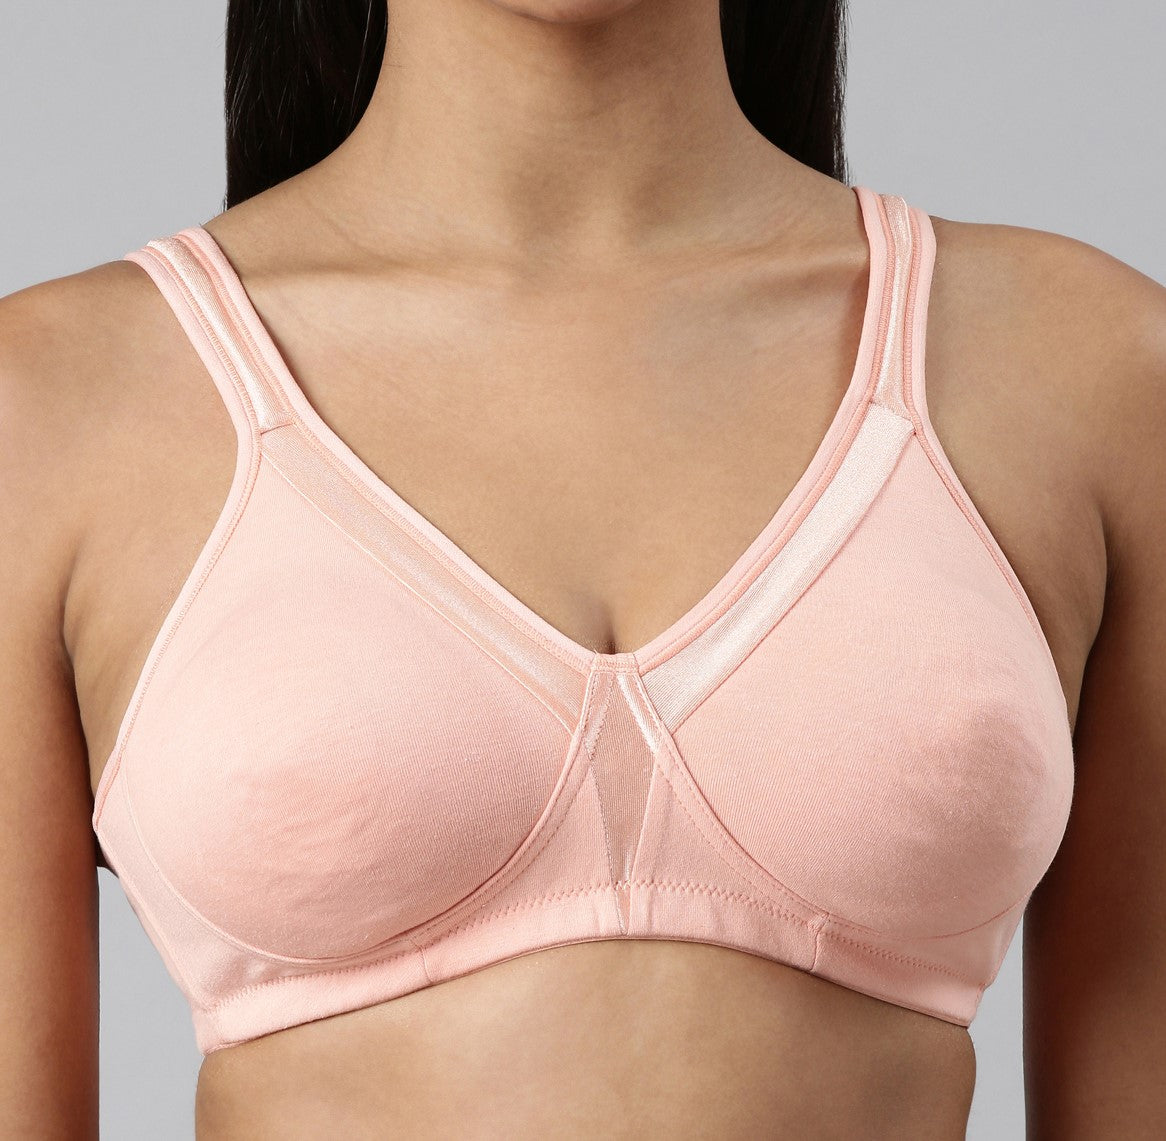 blossom-cover and hold-coral pink5-support bra